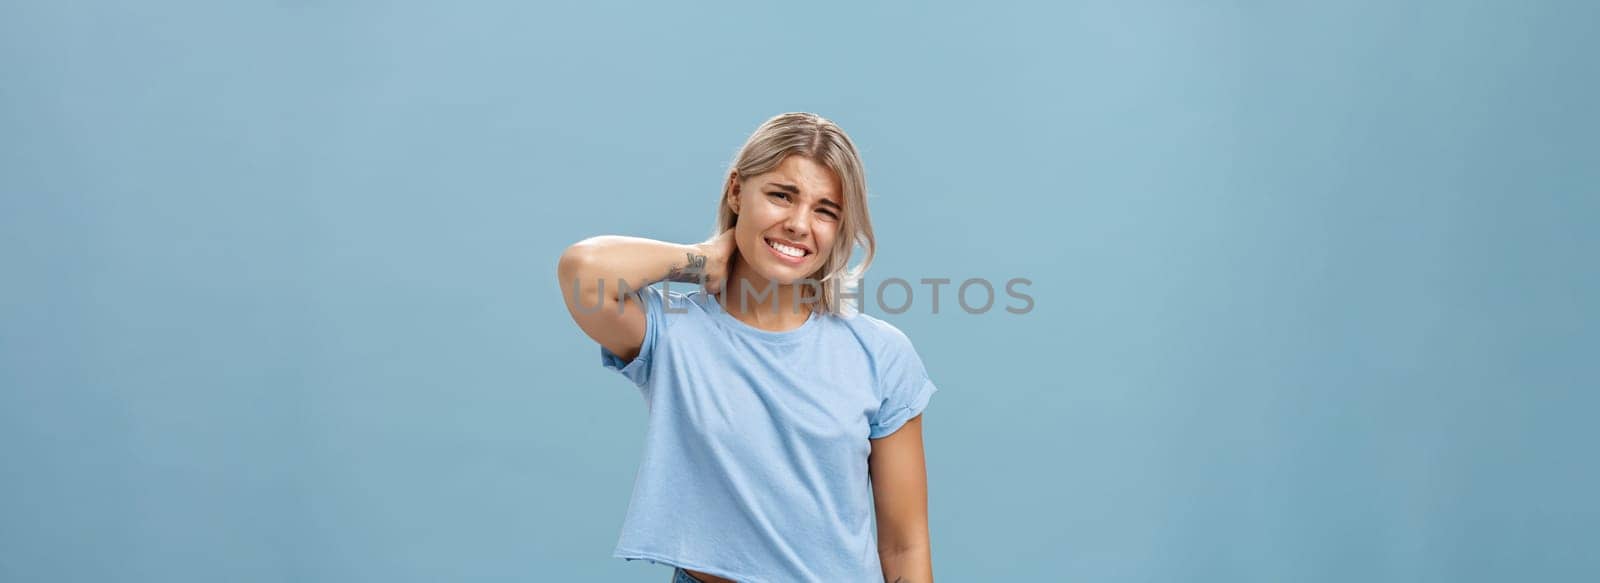 Girl unwilling to go with friend feeling awkward and unsure how say no frowning and clenching teeth making apologizing face rubbing neck behind saying sorry while rejecting offer over blue background by Benzoix